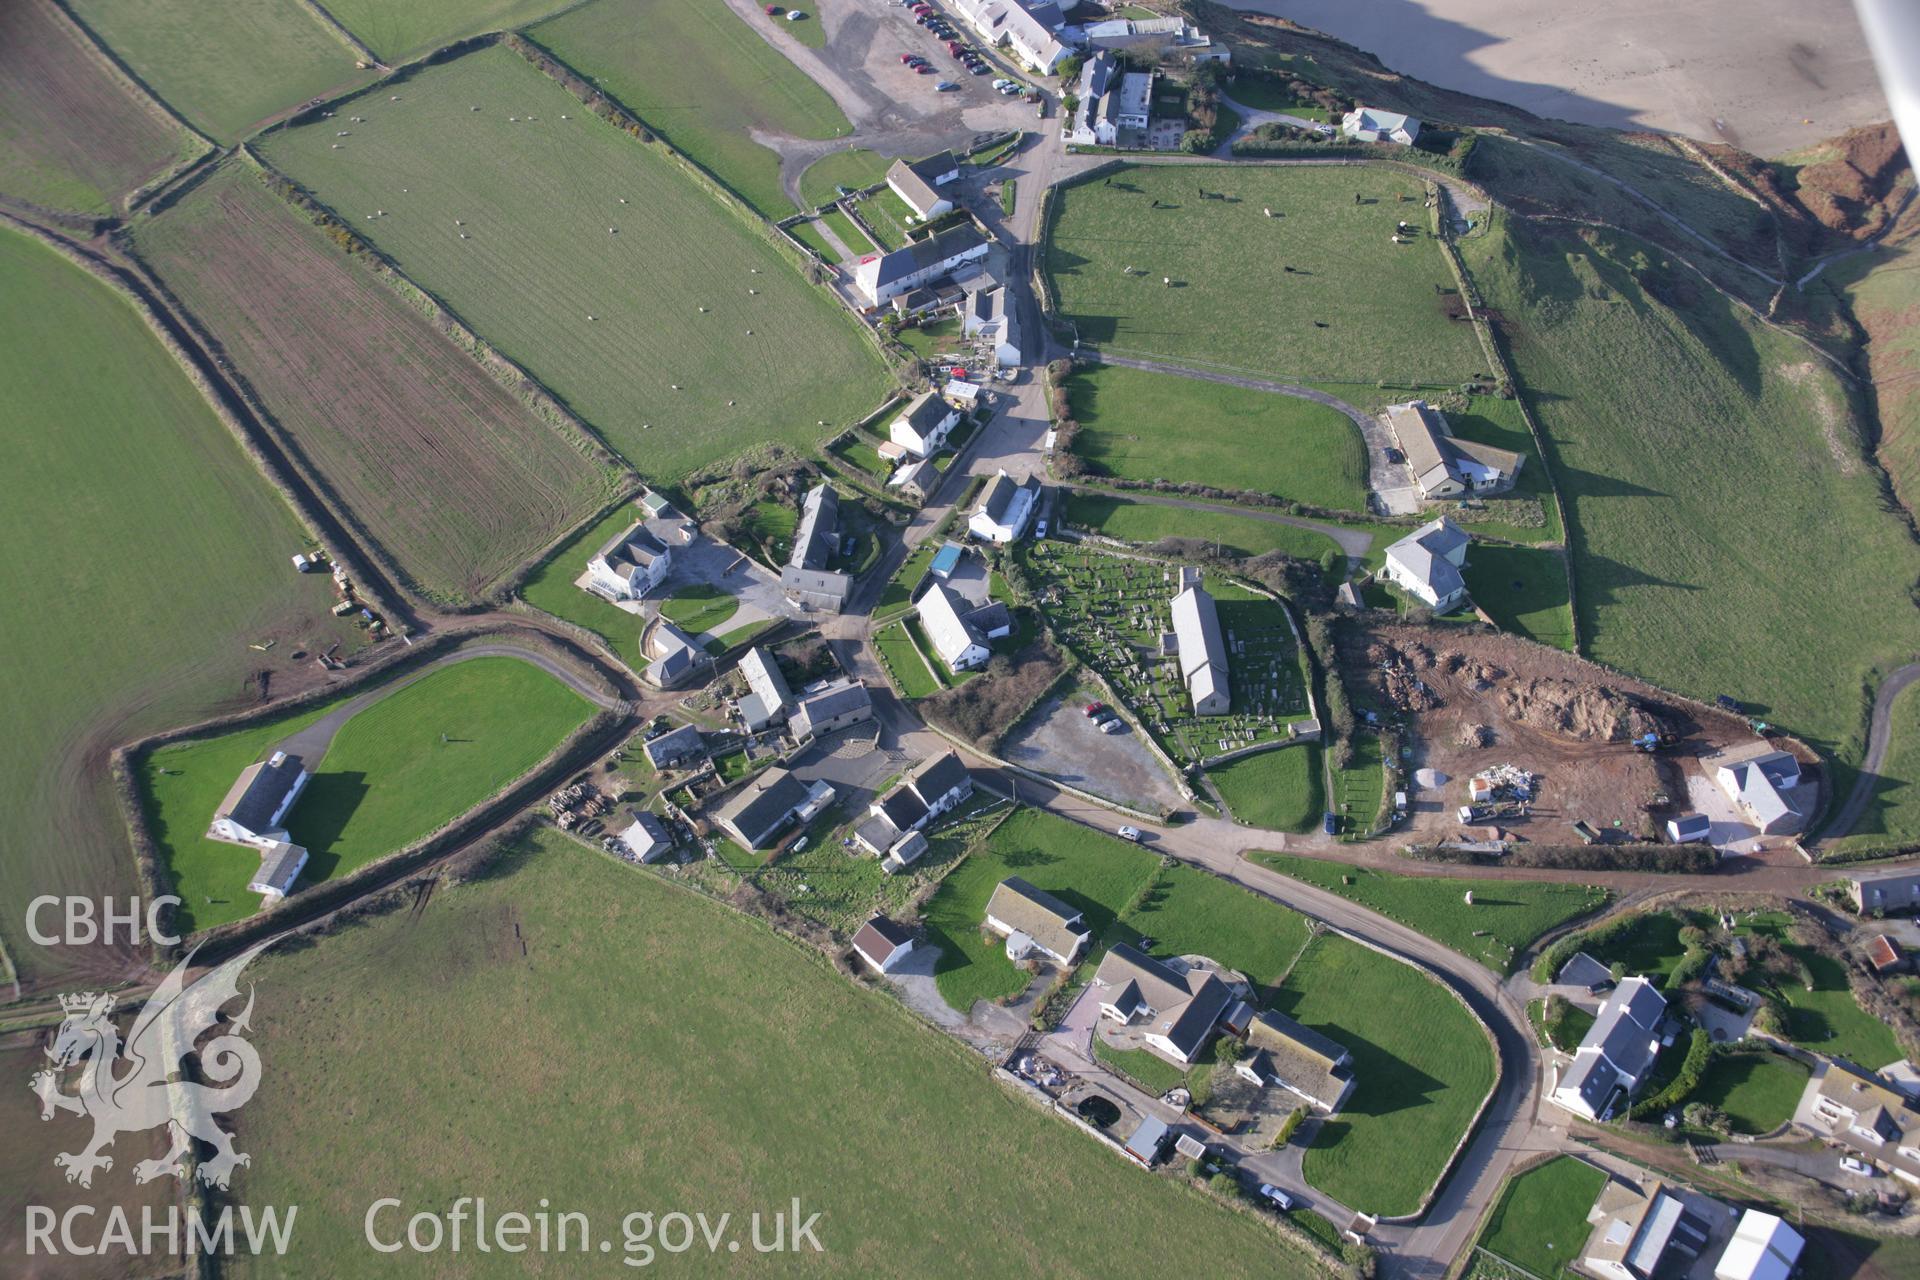 RCAHMW colour oblique aerial photograph of St Mary's Church, Rhossili viewed from the east. Taken on 26 January 2006 by Toby Driver